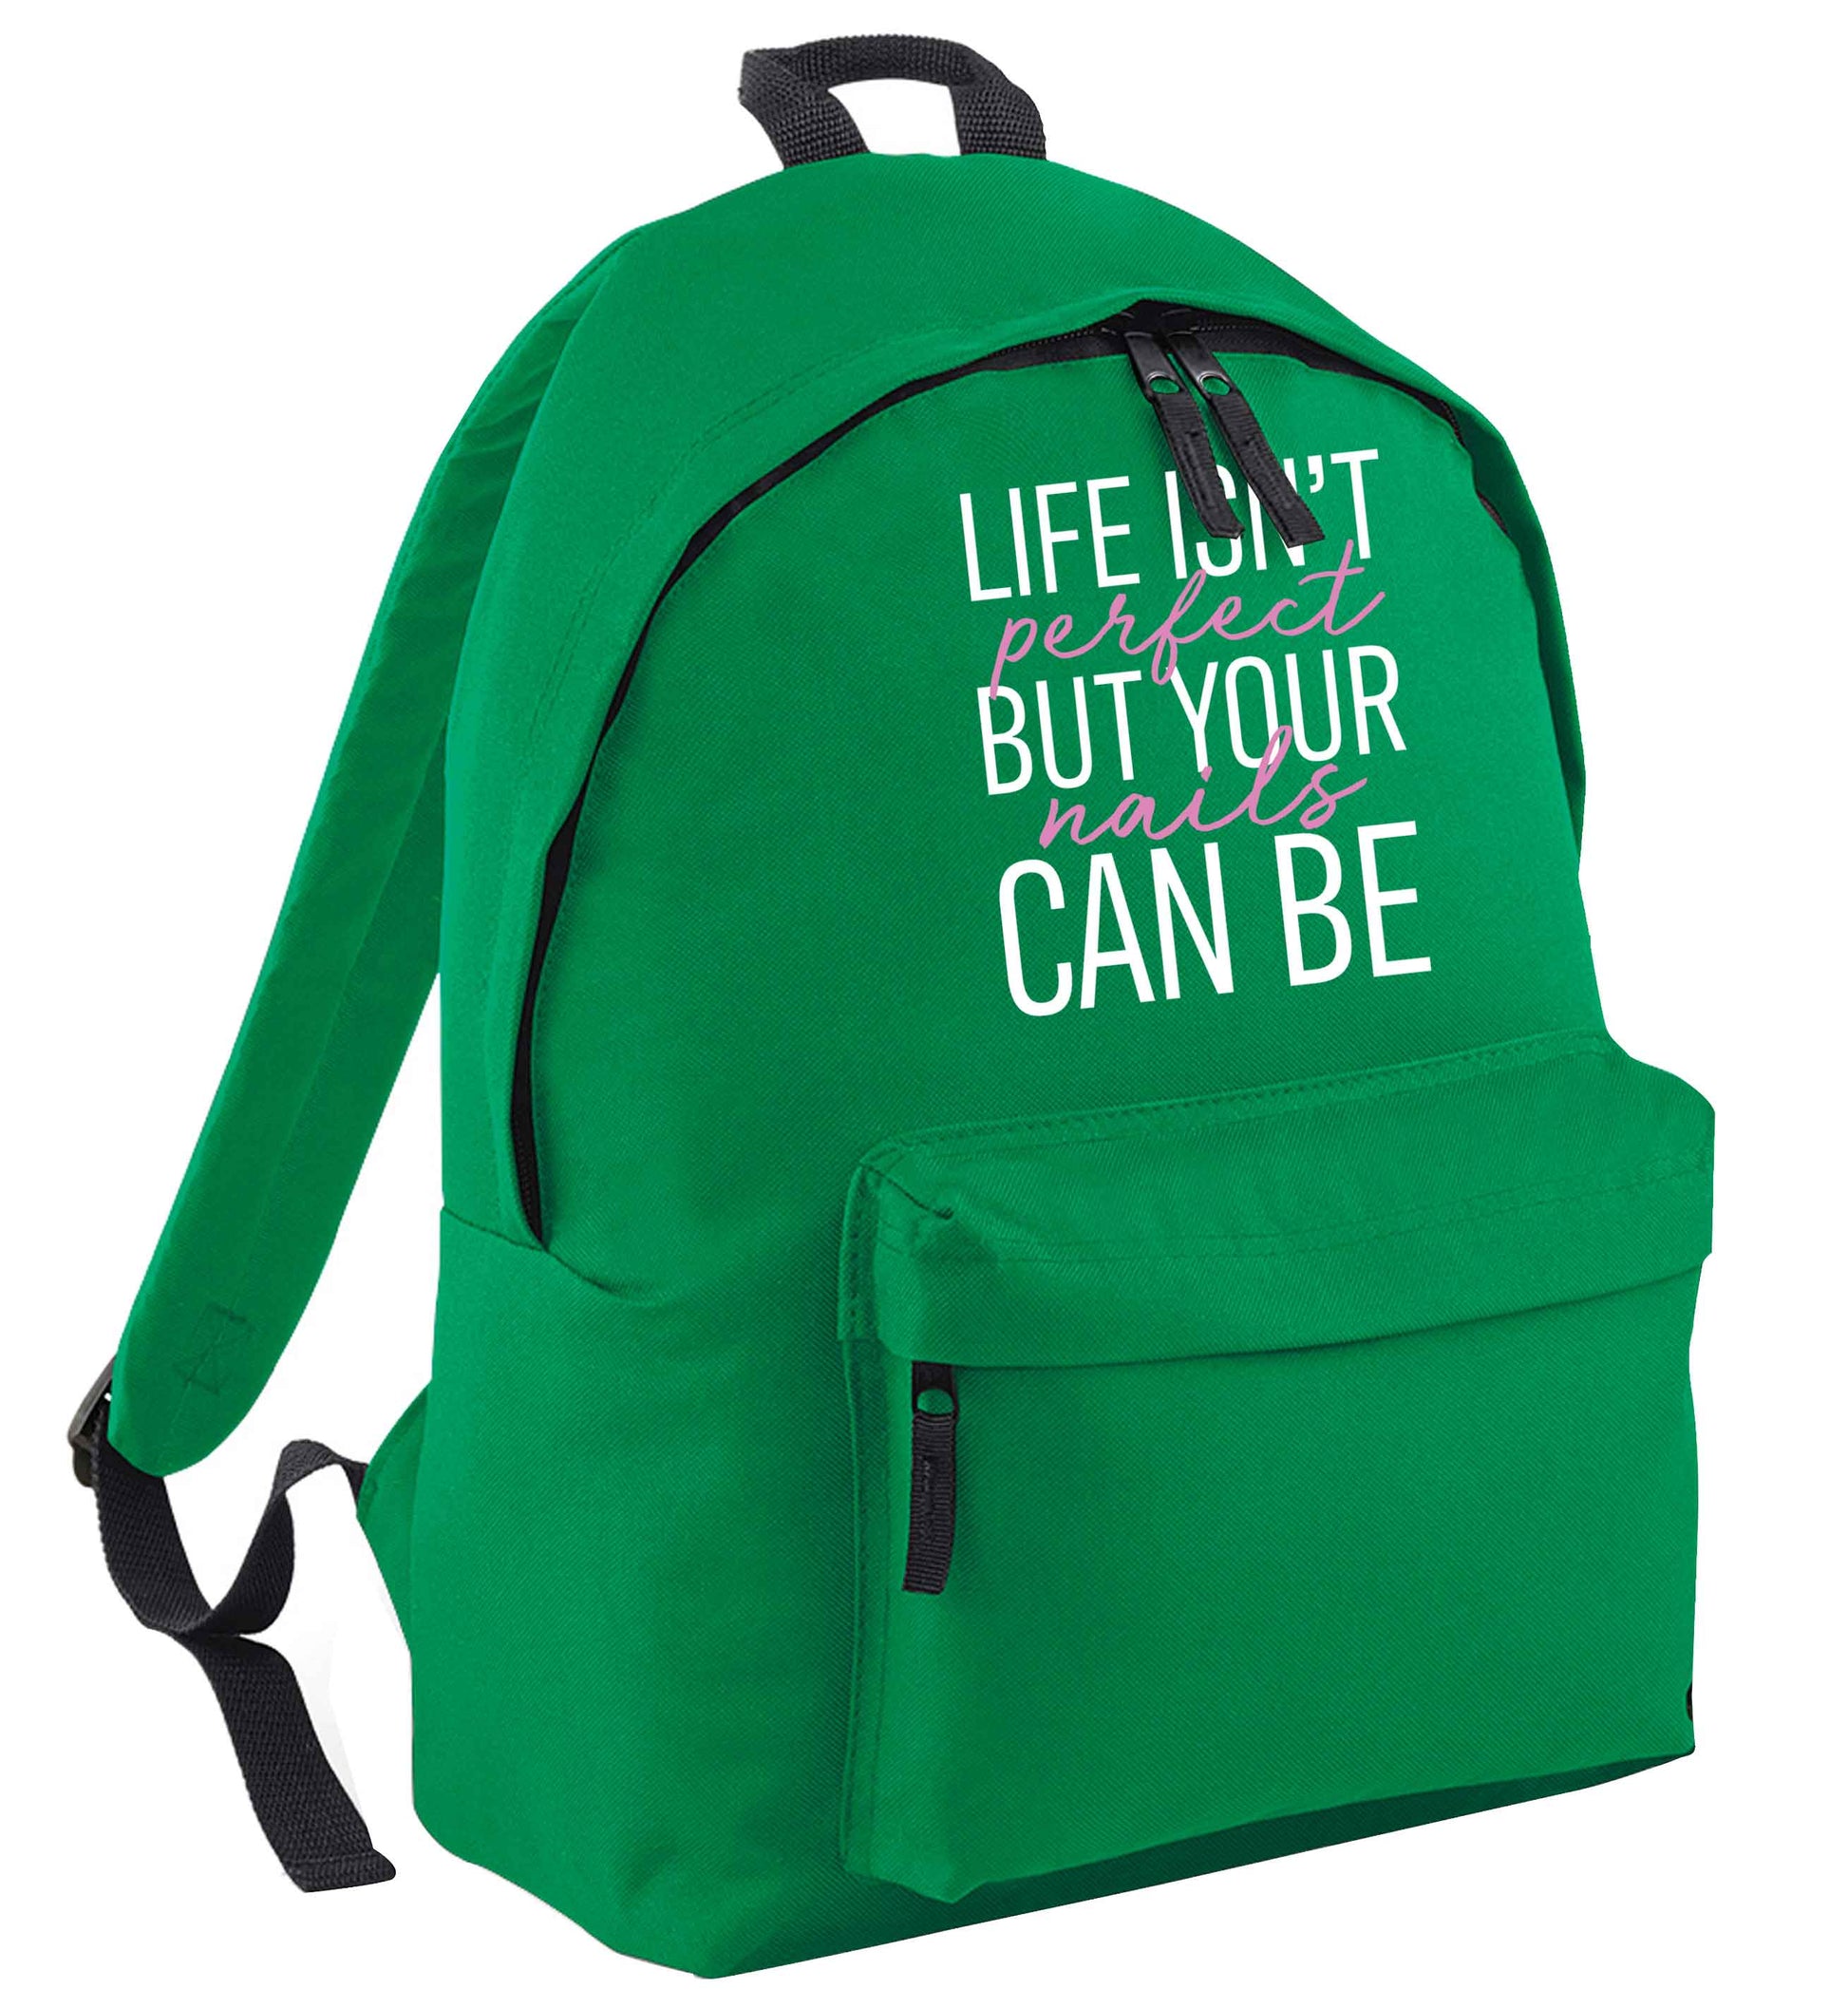 Life isn't perfect but your nails can be green adults backpack